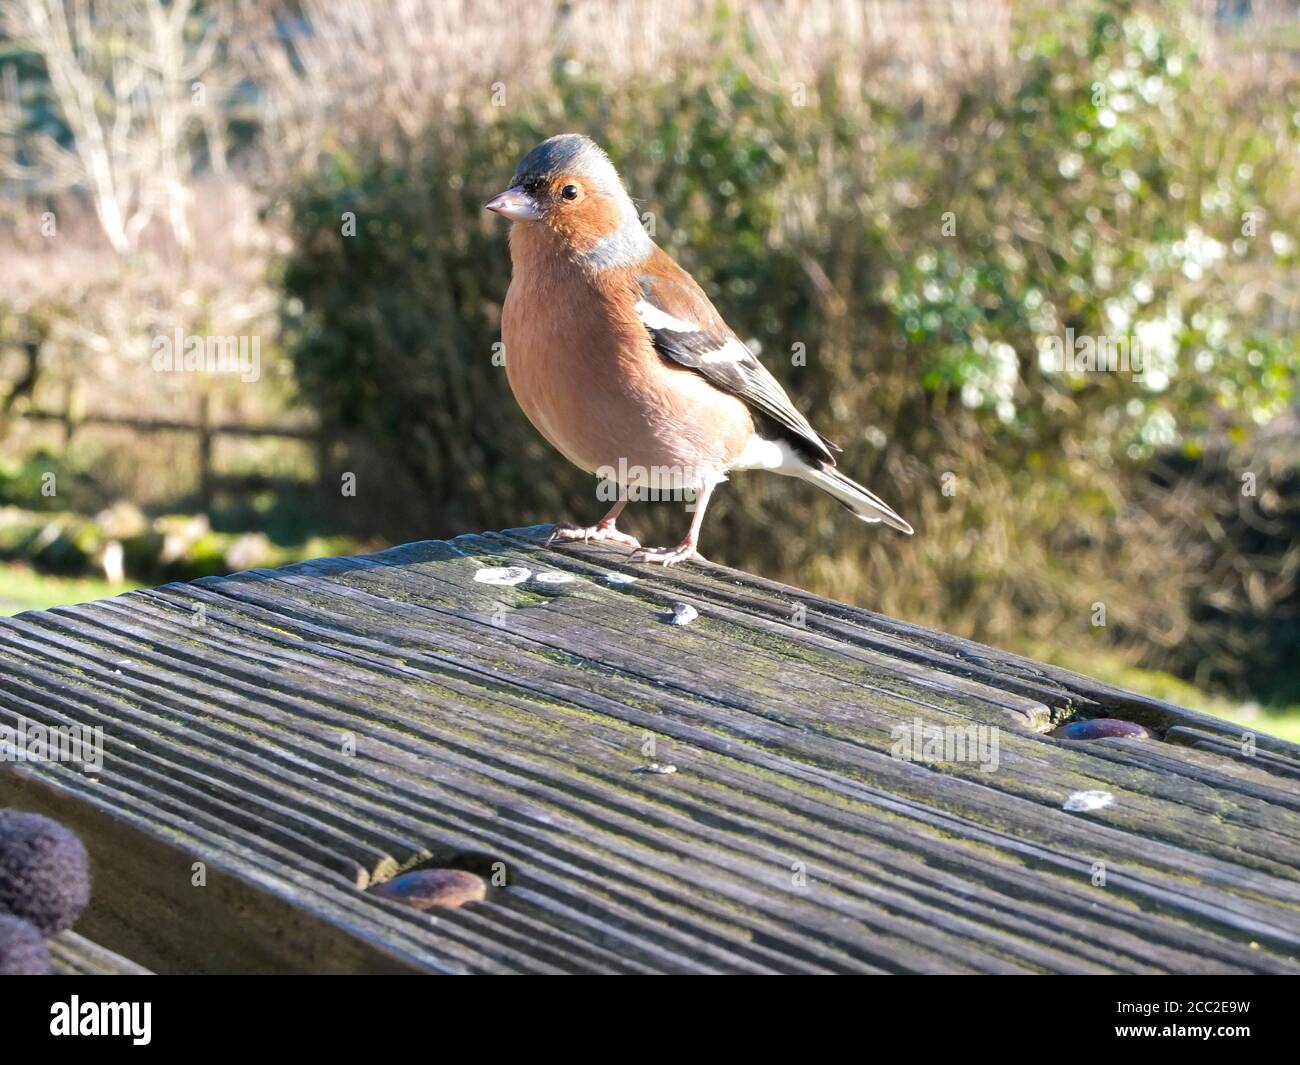 Single male Chaffinch, standing on a wooden table. Stock Photo